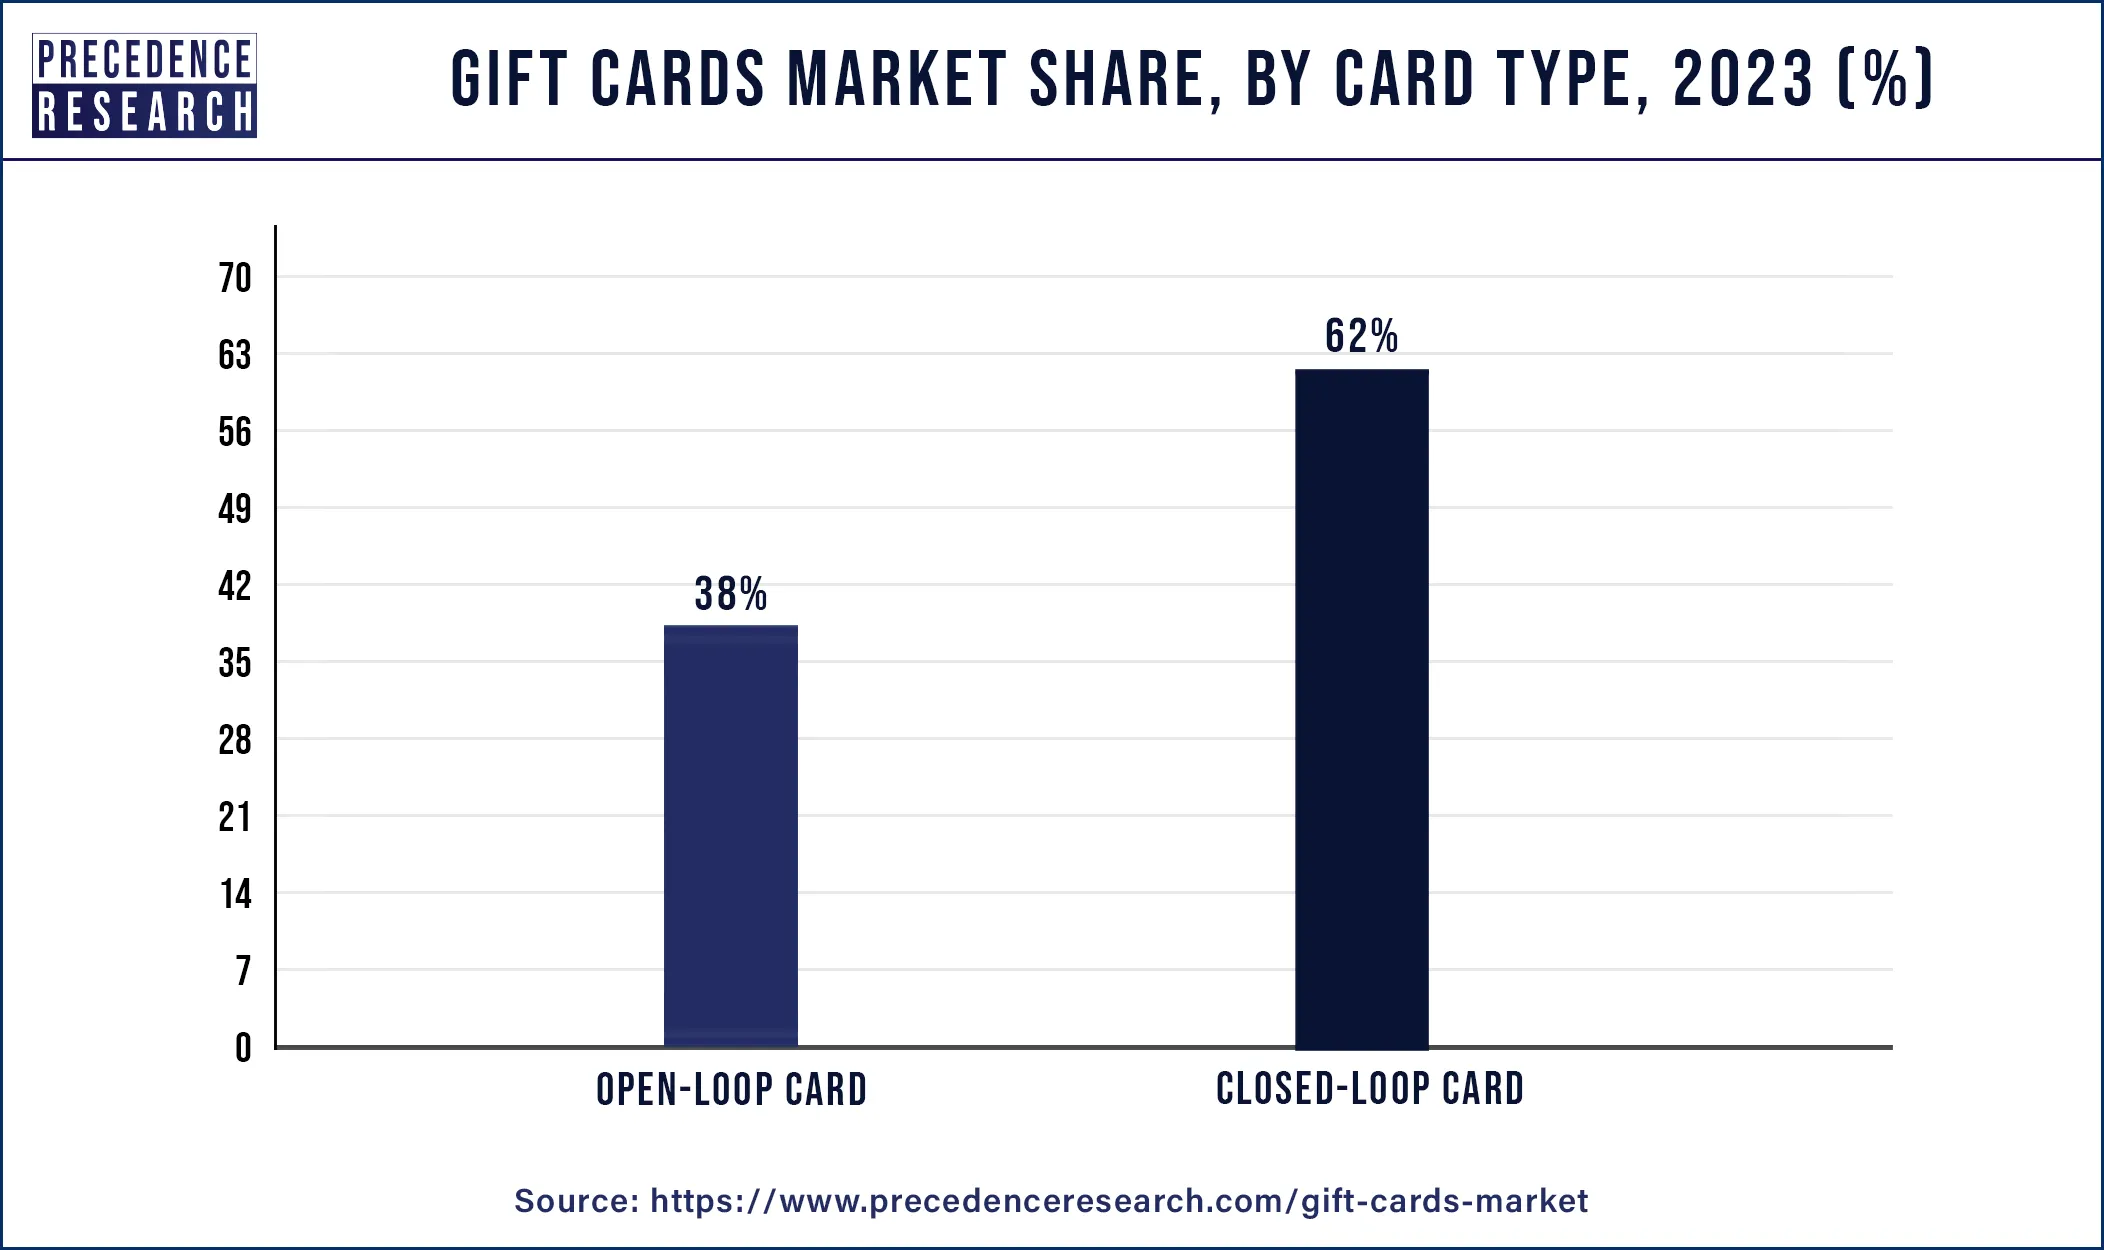 Gift Cards Market Share, By Card Type 2023 (%)